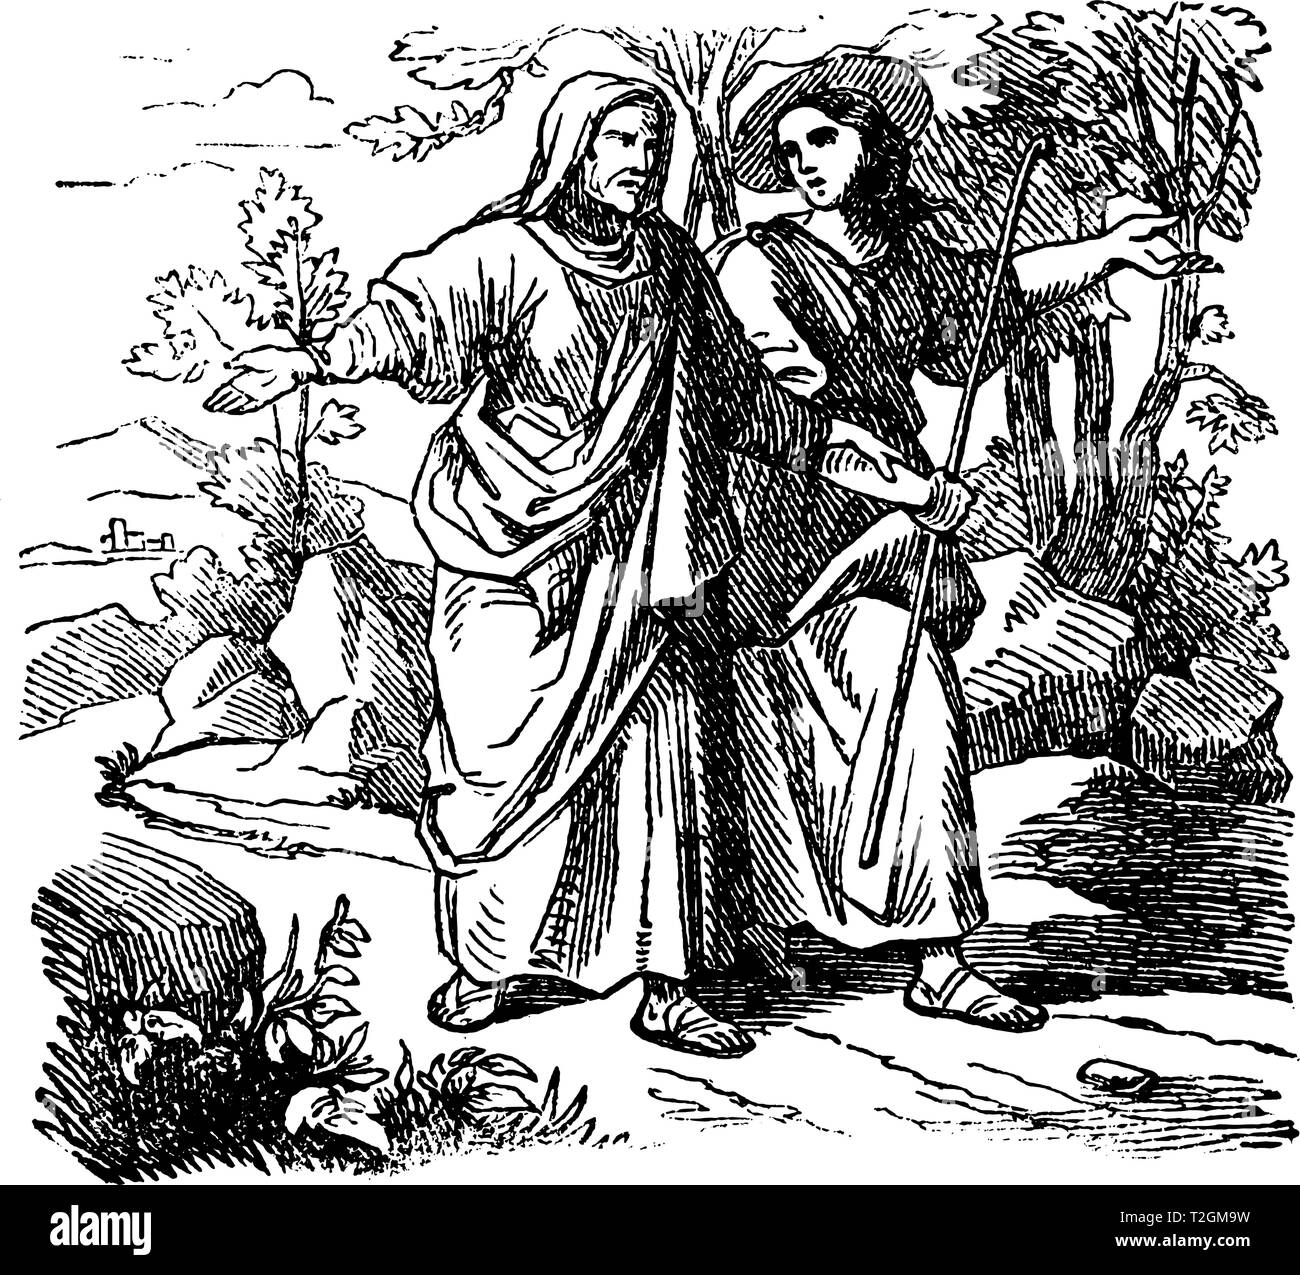 Vintage antique illustration and line drawing or engraving of biblical Ruth and Boaz. Man and woman are walking together. From Biblische Geschichte de Stock Vector